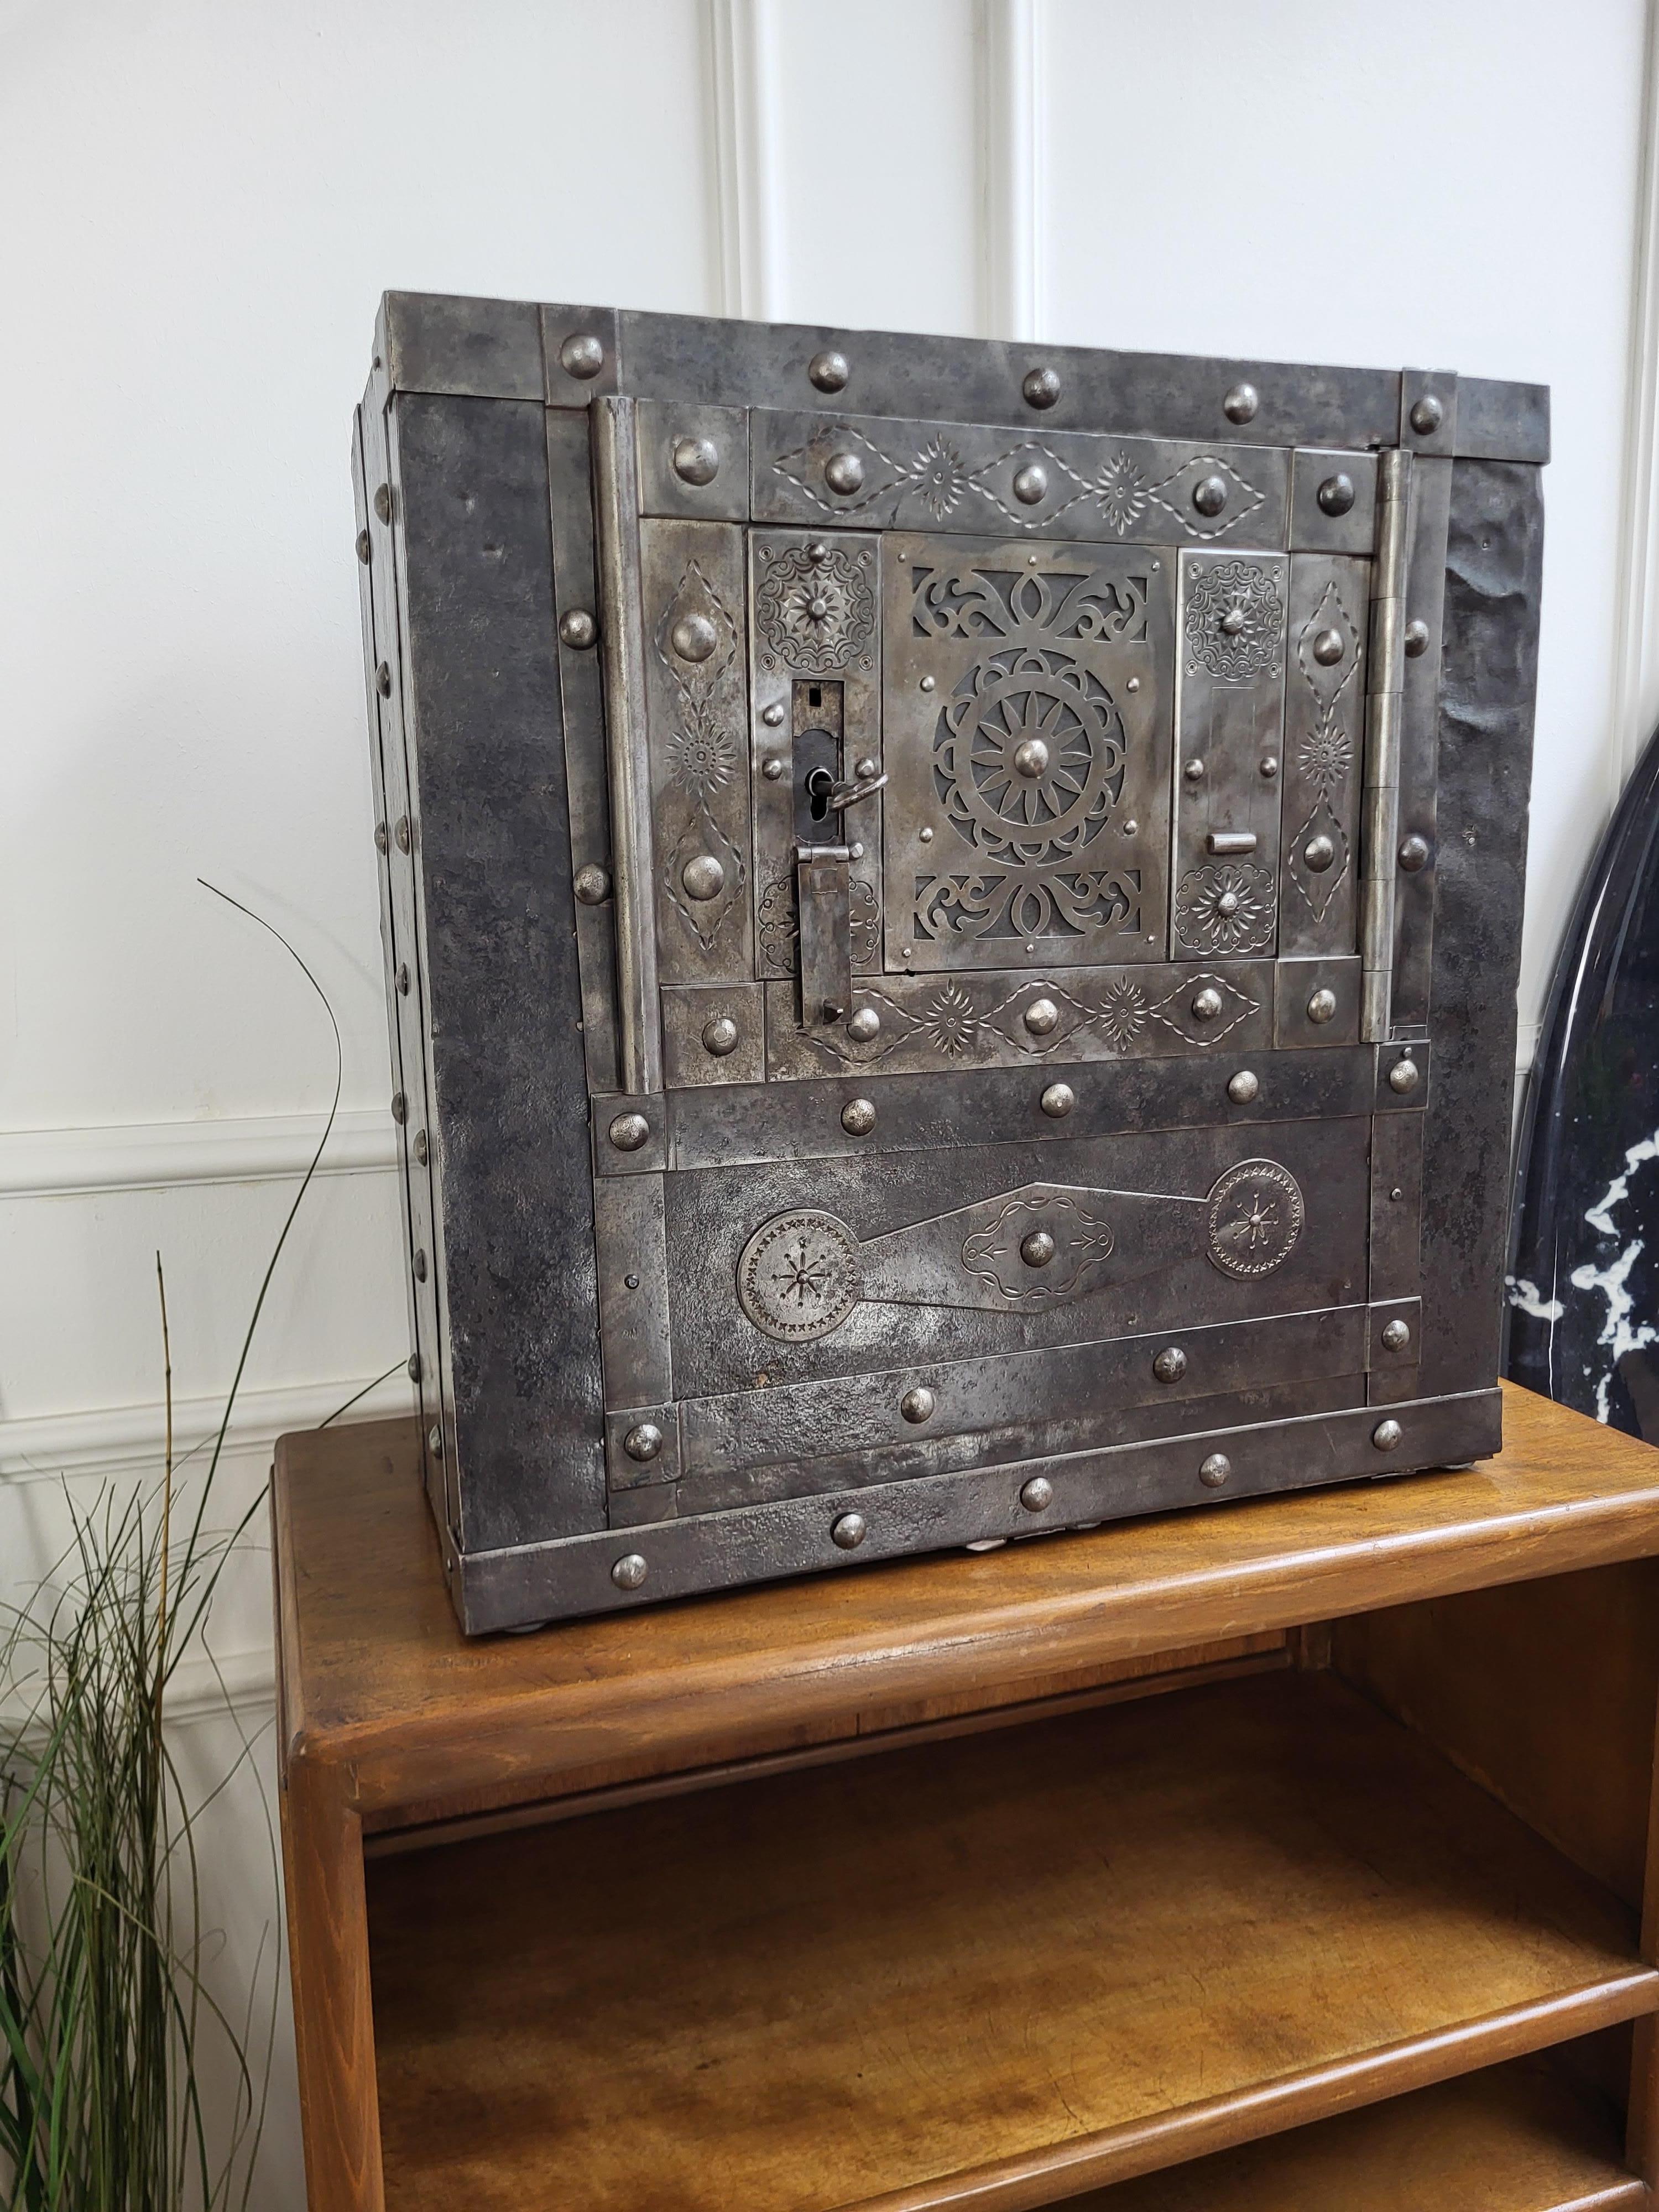 Beautiful and rare example of late 18th century Italian master blacksmith craftsmanship, this antique studded safe with typical all-around hobnails and great wrought iron details, probably from the Piedmont region, has a great metal color with